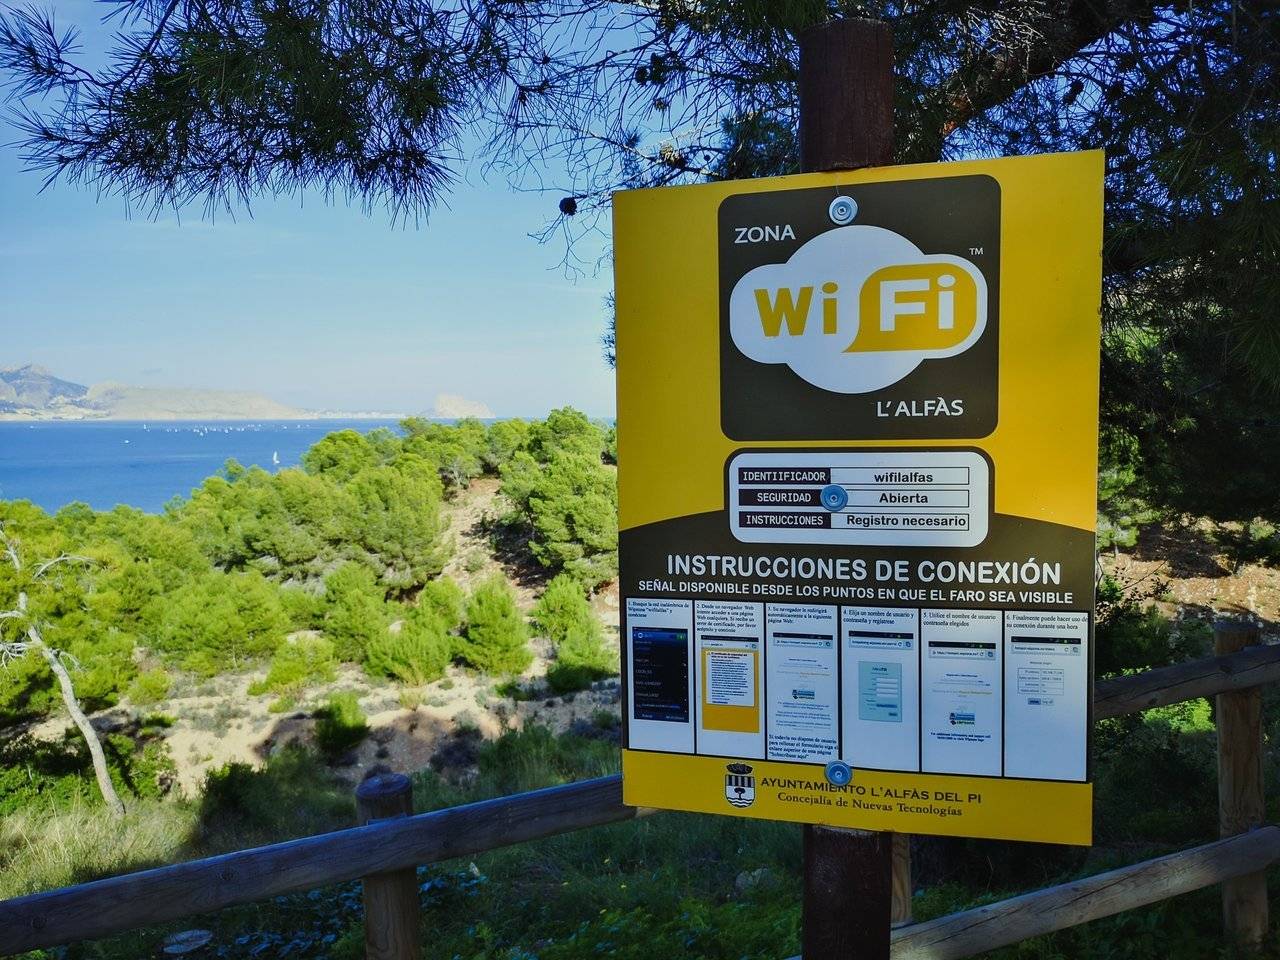   To my surprise, the area of the park even includes free wi-fi. Ironically, the routes, which need a connection for navigation the least, are the only ones to have it. Photo by Alis Monte [CC BY-SA 4.0], via Connecting the Dots